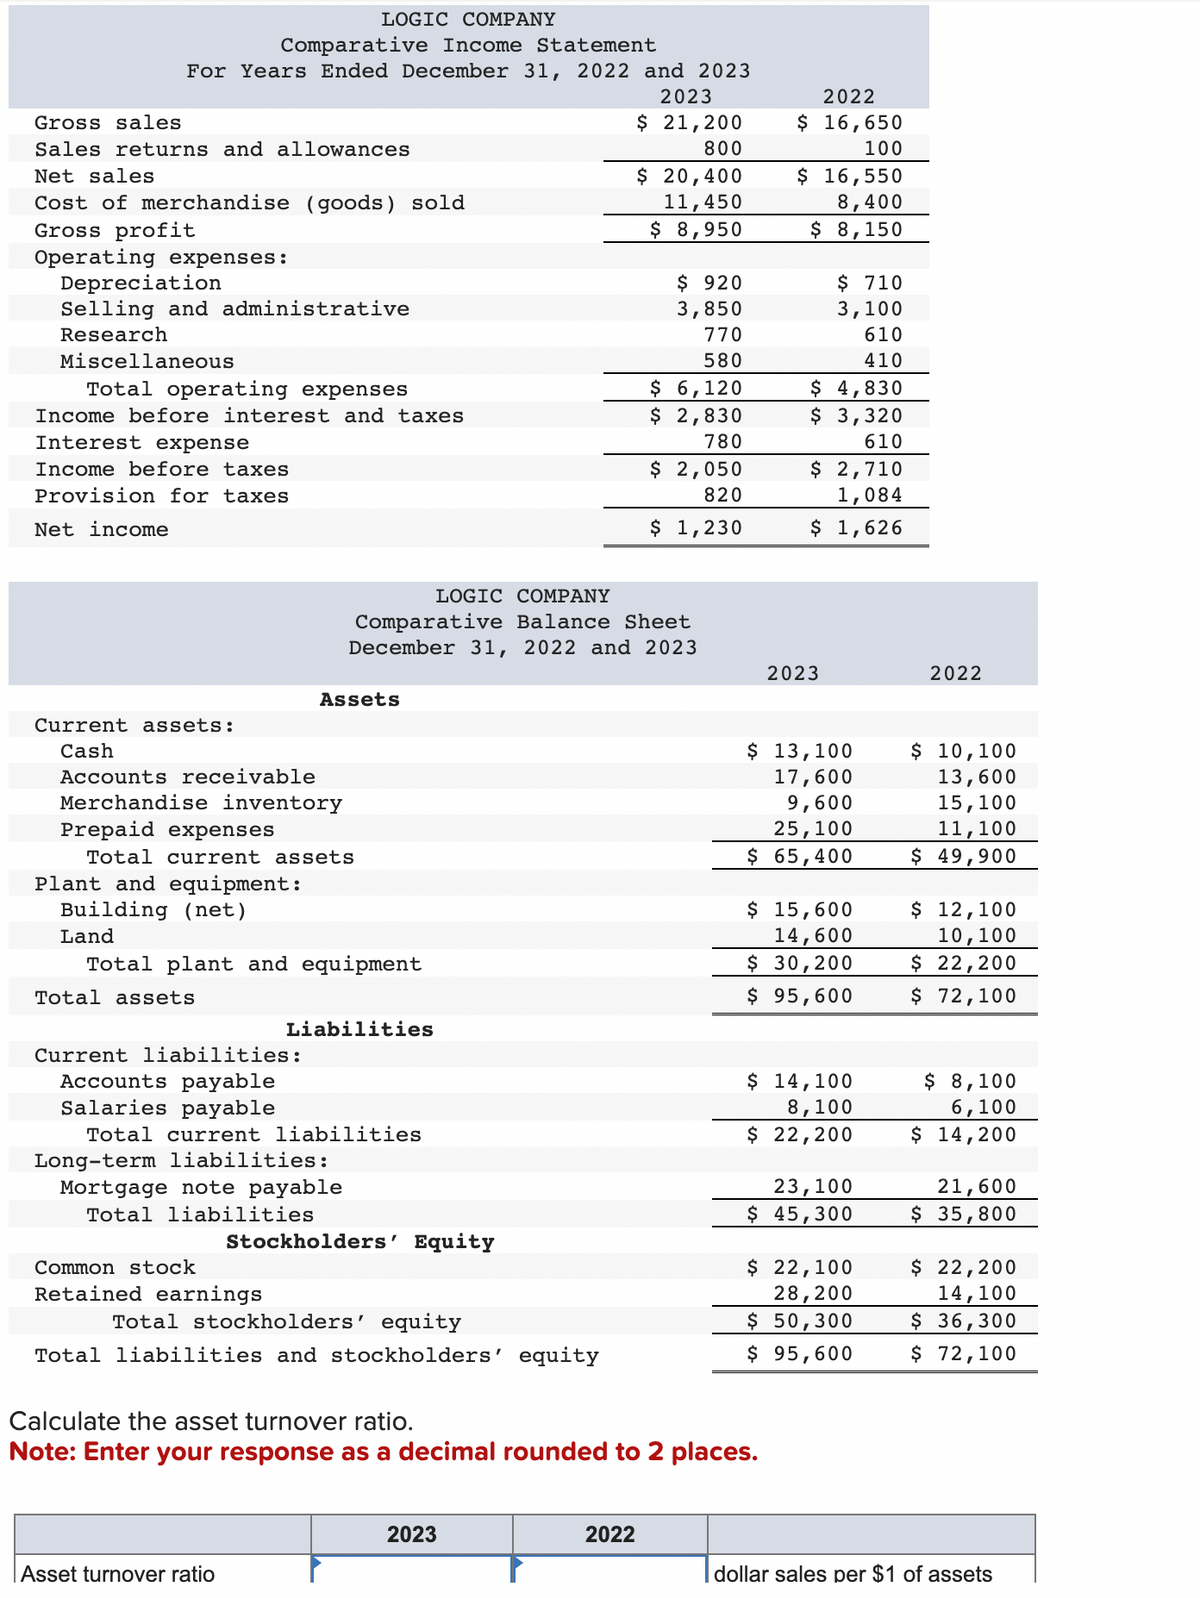 LOGIC COMPANY
Comparative Income Statement
For Years Ended December 31, 2022 and 2023
Gross sales
Sales returns and allowances
Net sales
Cost of merchandise (goods) sold
Gross profit
Operating expenses:
Depreciation
Selling and administrative
Research
Miscellaneous
Total operating expenses
Income before interest and taxes
Interest expense
Income before taxes
Provision for taxes
Net income
Current assets:
Cash
Accounts receivable
Merchandise inventory
Prepaid expenses
Total current assets
Total assets
Assets
Plant and equipment:
Building (net)
Land
Total plant and equipment
Current liabilities:
Accounts payable
Salaries payable
Total current liabilities
Long-term liabilities:
Mortgage note payable
Total liabilities
Common stock
Retained earnings
Liabilities
Asset turnover ratio
LOGIC COMPANY
Comparative Balance Sheet
December 31, 2022 and 2023
Stockholders' Equity
Total stockholders' equity
Total liabilities and stockholders' equity
2023
$ 21,200
800
2023
$ 20,400
11,450
$ 8,950
2022
$ 920
3,850
770
580
$ 6,120
$
2,830
780
$ 2,050
820
$ 1,230
2022
$ 16,650
100
$ 16,550
8,400
$ 8,150
Calculate the asset turnover ratio.
Note: Enter your response as a decimal rounded to 2 places.
$ 710
3,100
610
410
$ 4,830
$ 3,320
610
$ 2,710
1,084
$ 1,626
2023
$ 13,100
17,600
9,600
25,100
$ 65,400
$ 15,600
14,600
$ 30,200
$ 95,600
$ 14,100
8,100
$ 22,200
23,100
$ 45,300
$ 22,100
28,200
$ 50,300
$ 95,600
2022
$ 10,100
13,600
15,100
11,100
$ 49,900
$ 12,100
10,100
$ 22,200
$ 72,100
$ 8,100
6,100
$ 14,200
21,600
$ 35,800
$ 22,200
14,100
$ 36,300
$ 72,100
dollar sales per $1 of assets